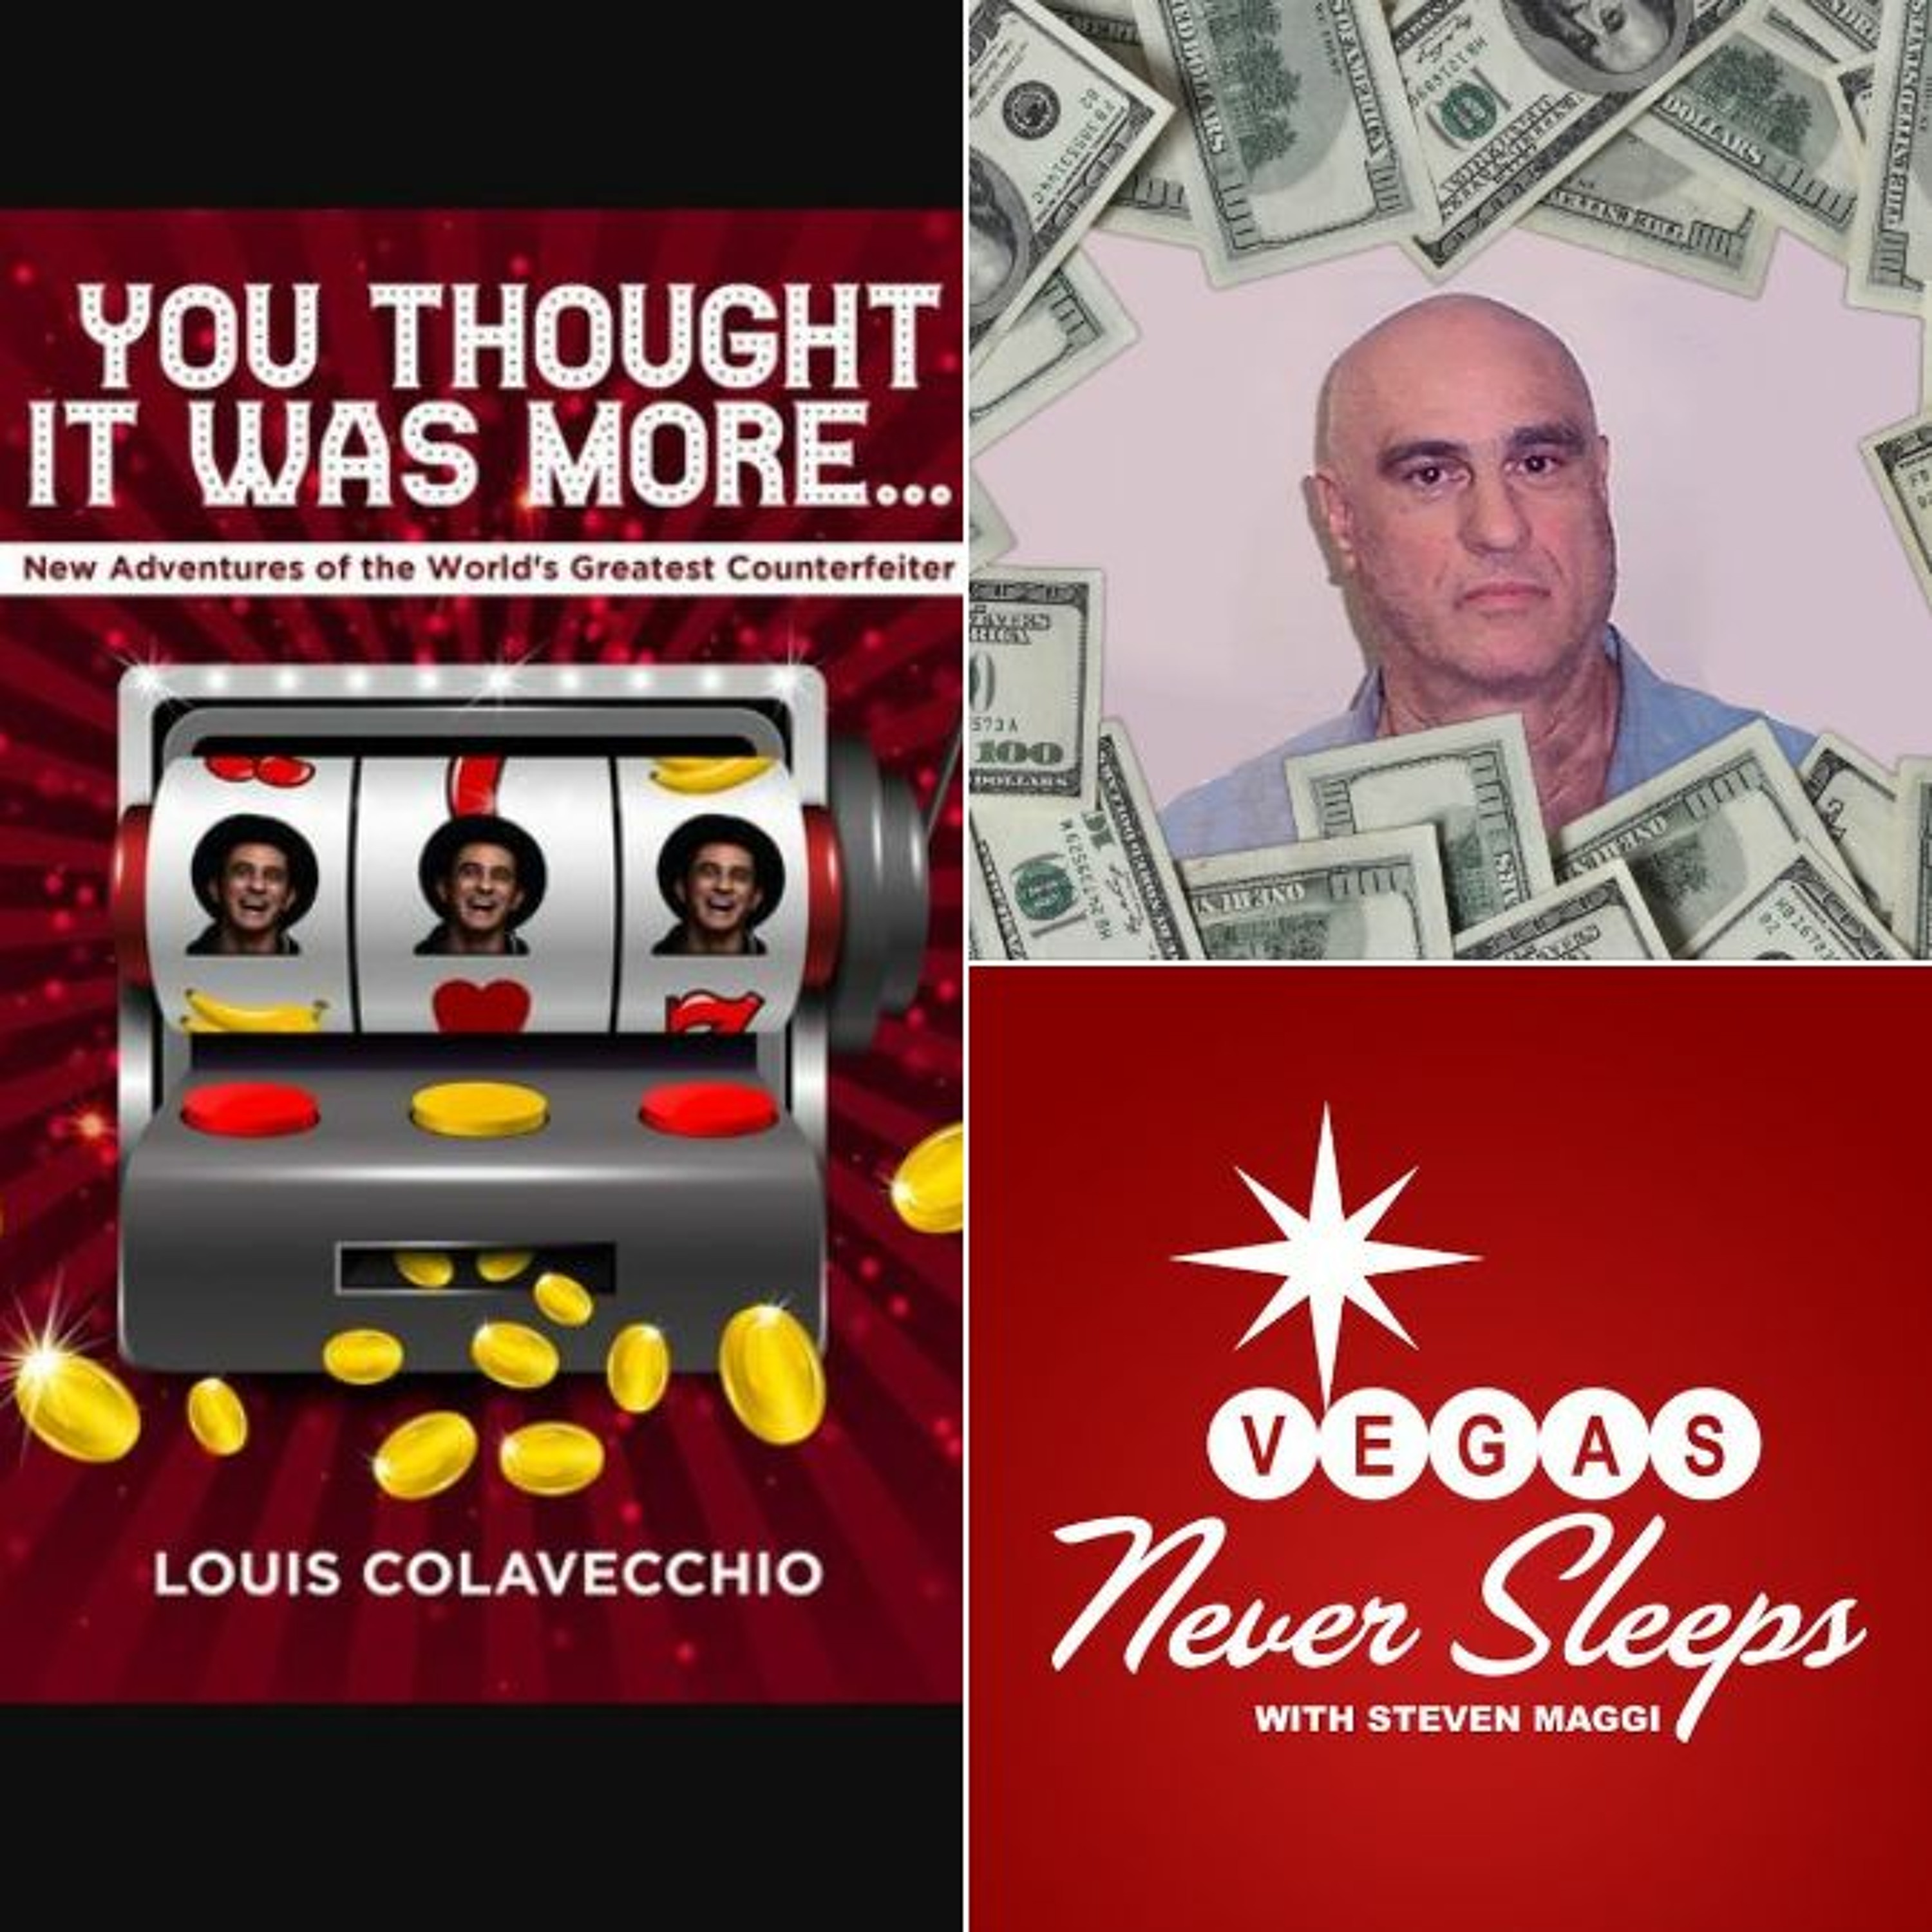 ”Louie the Coin” - The Andy Thibault & Joe Broadmeadow Interview